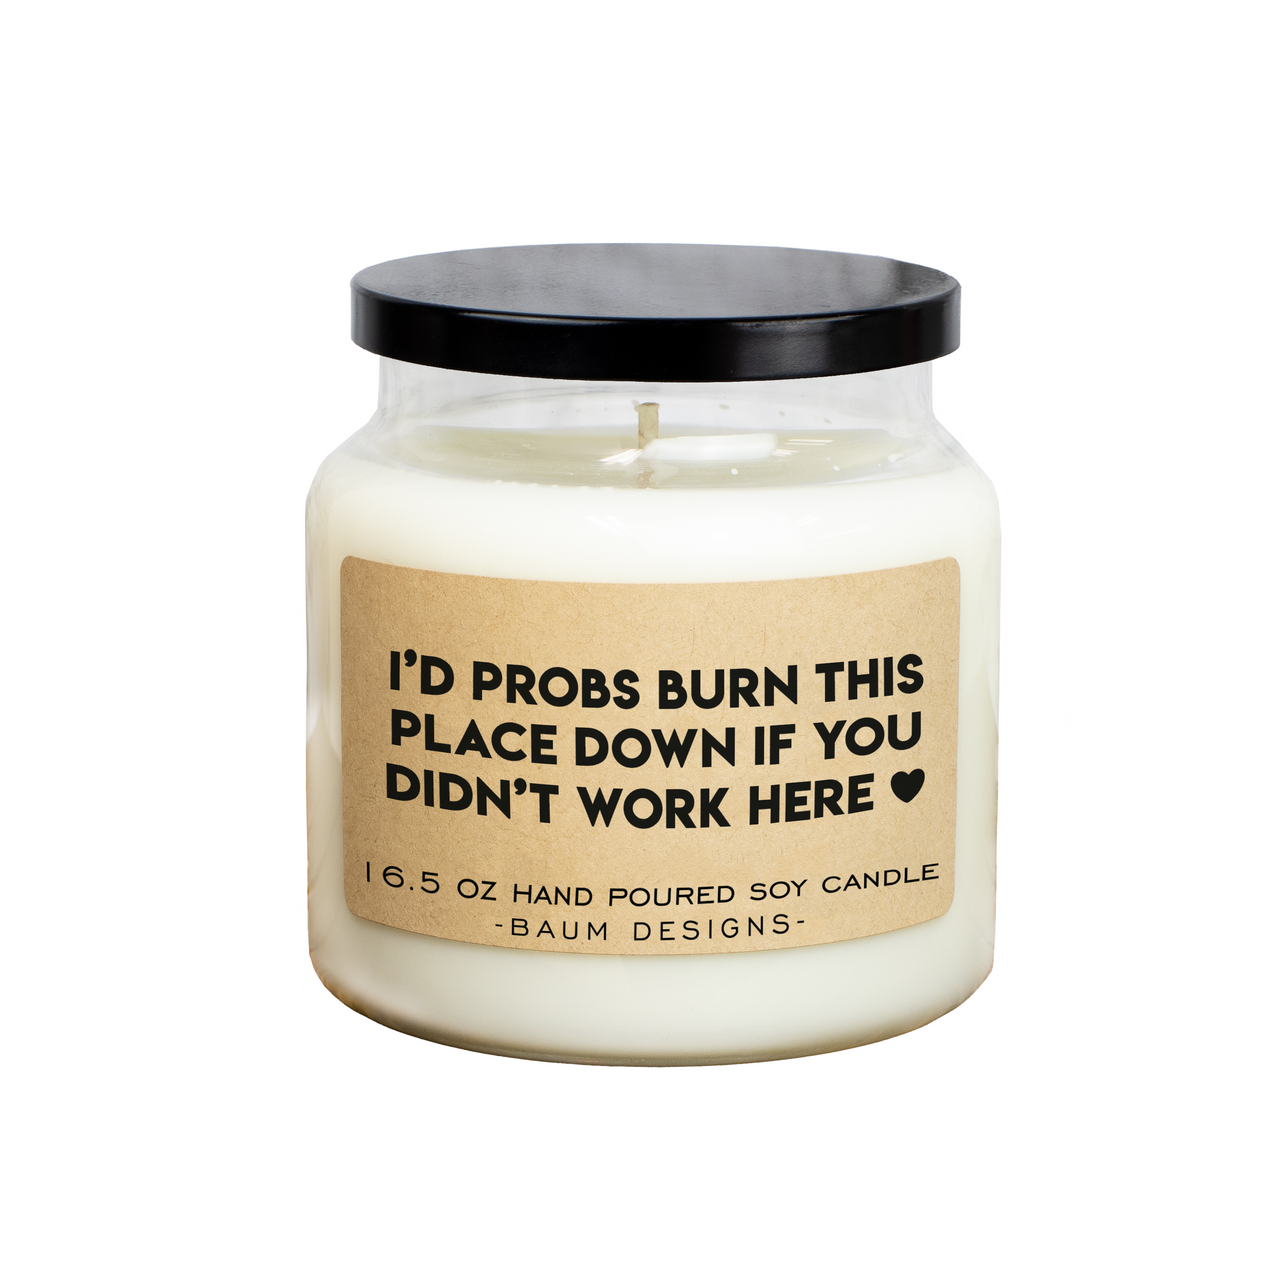 I'd Probs Burn This Place Down If You Didn't Work Here Soy Candle Baum Designs